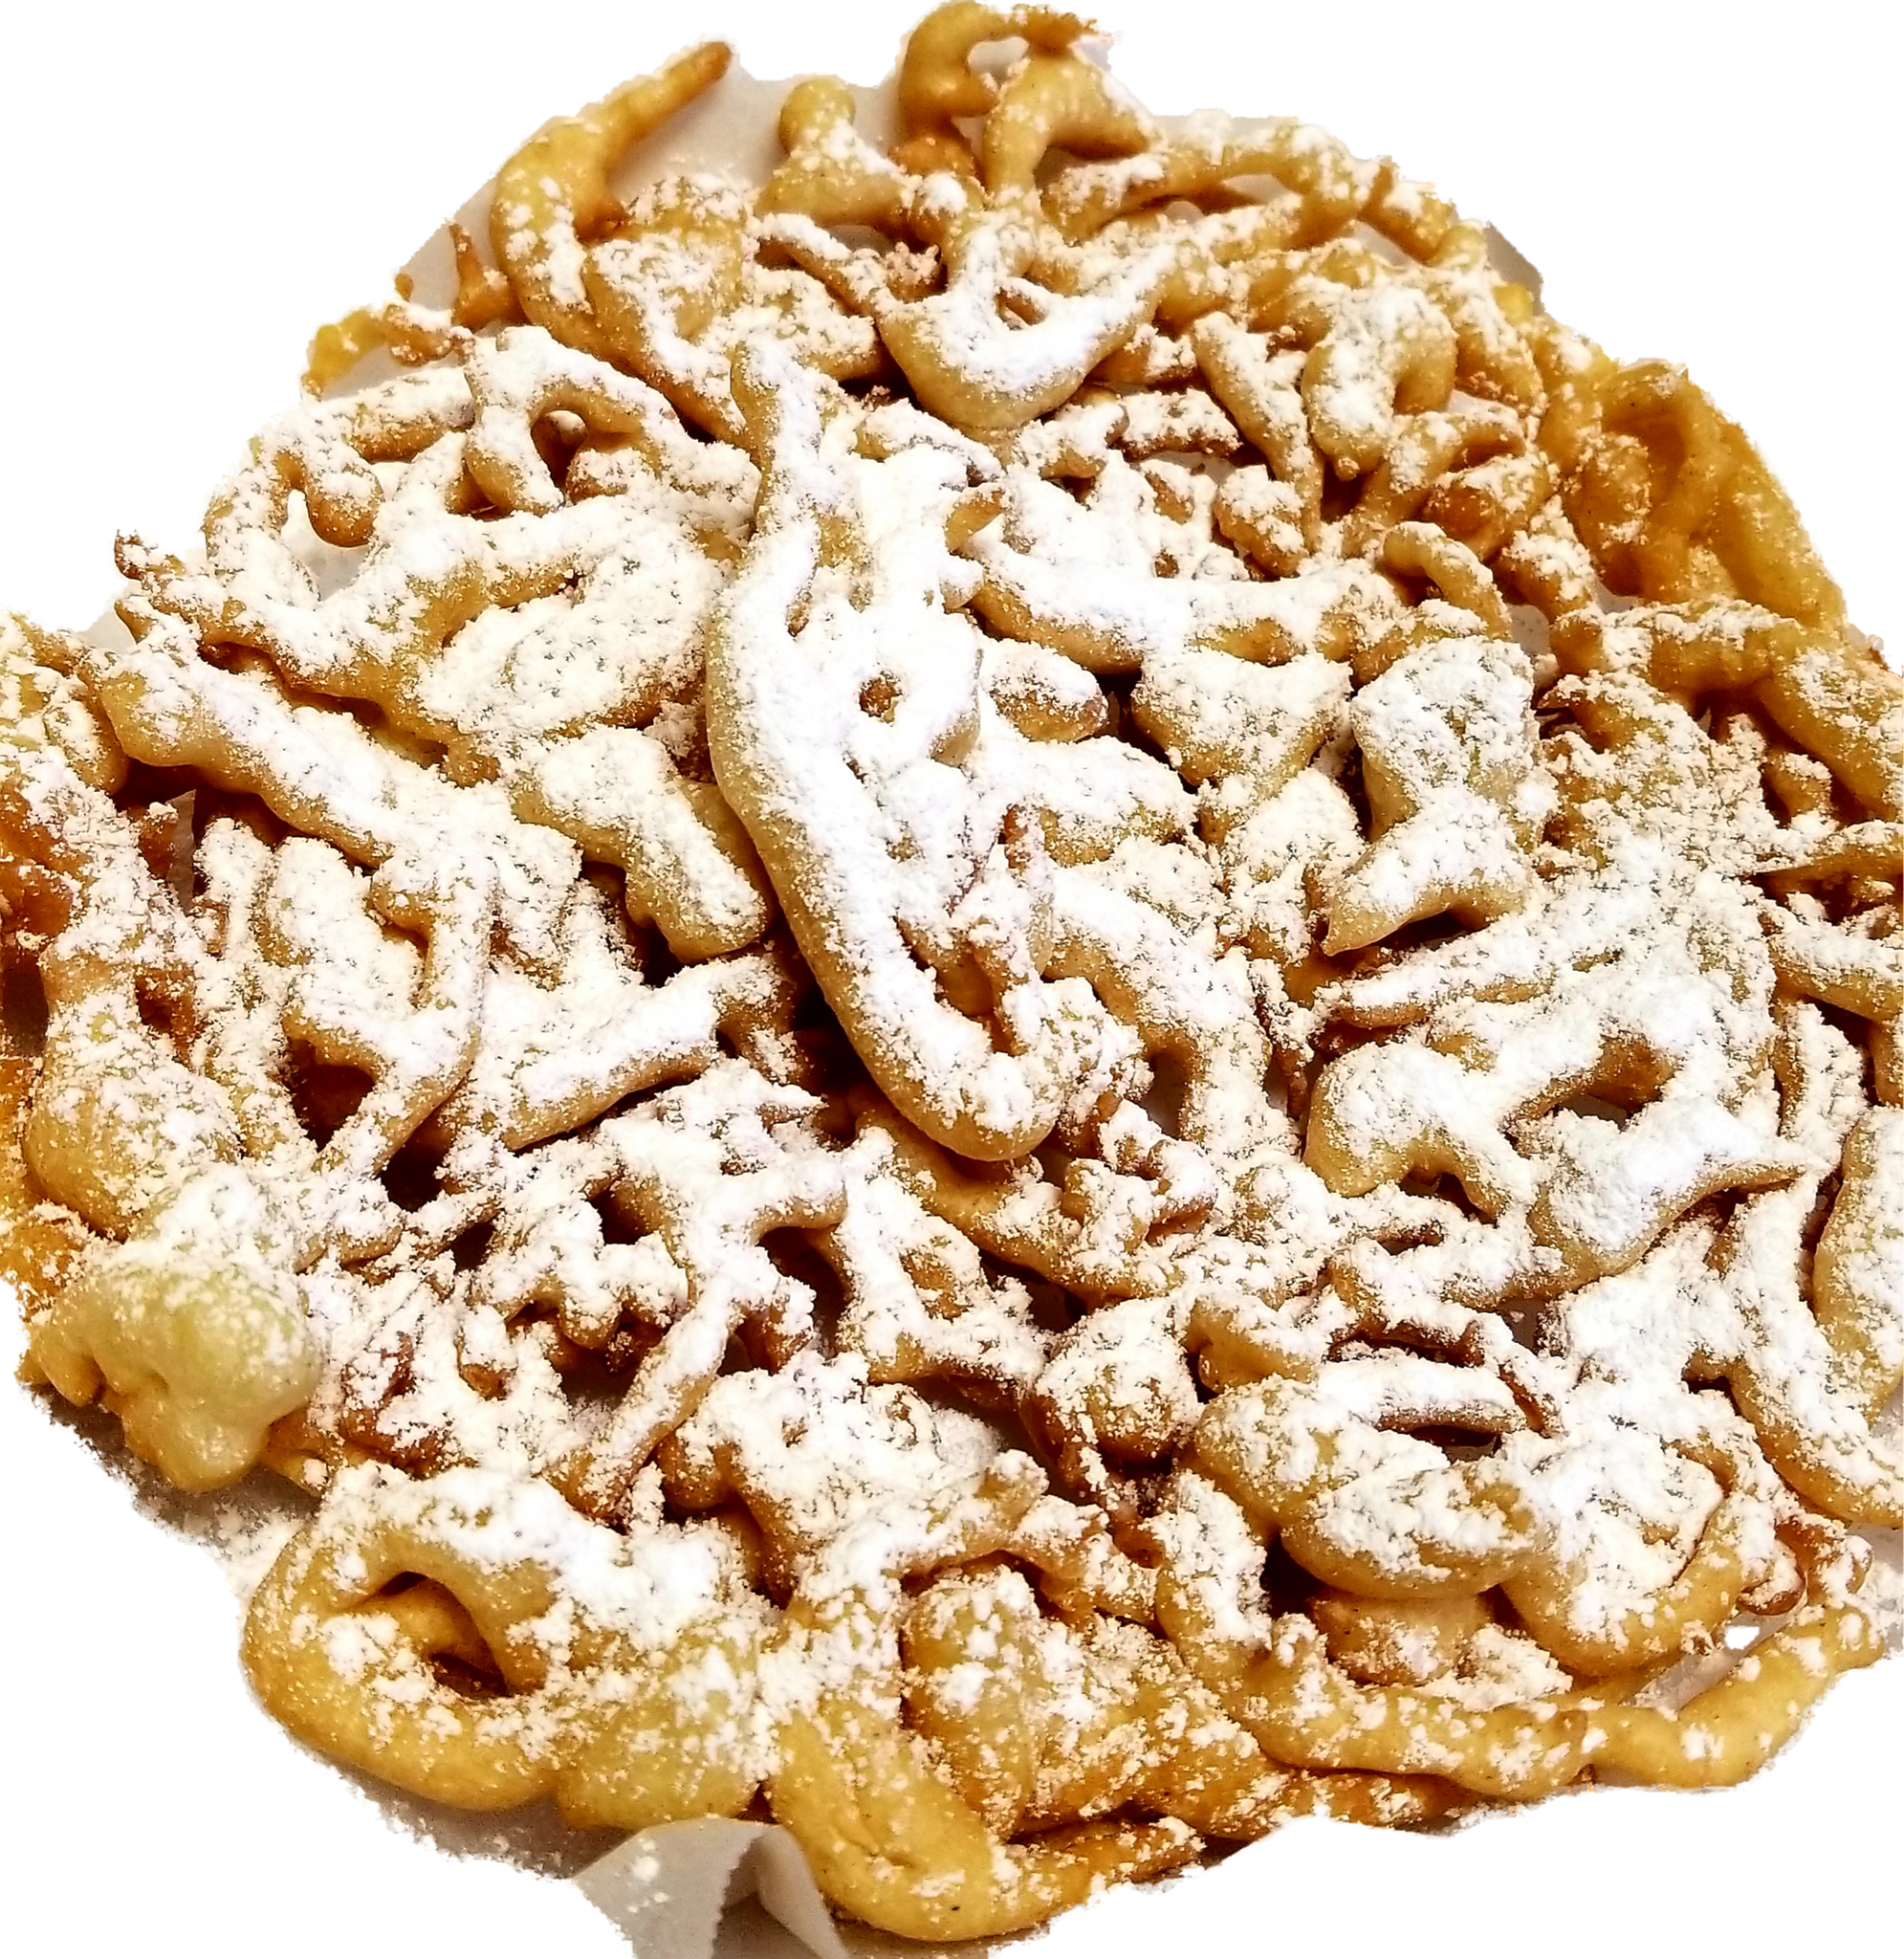 Funnel Cake Recipe to Make at Home - HubPages